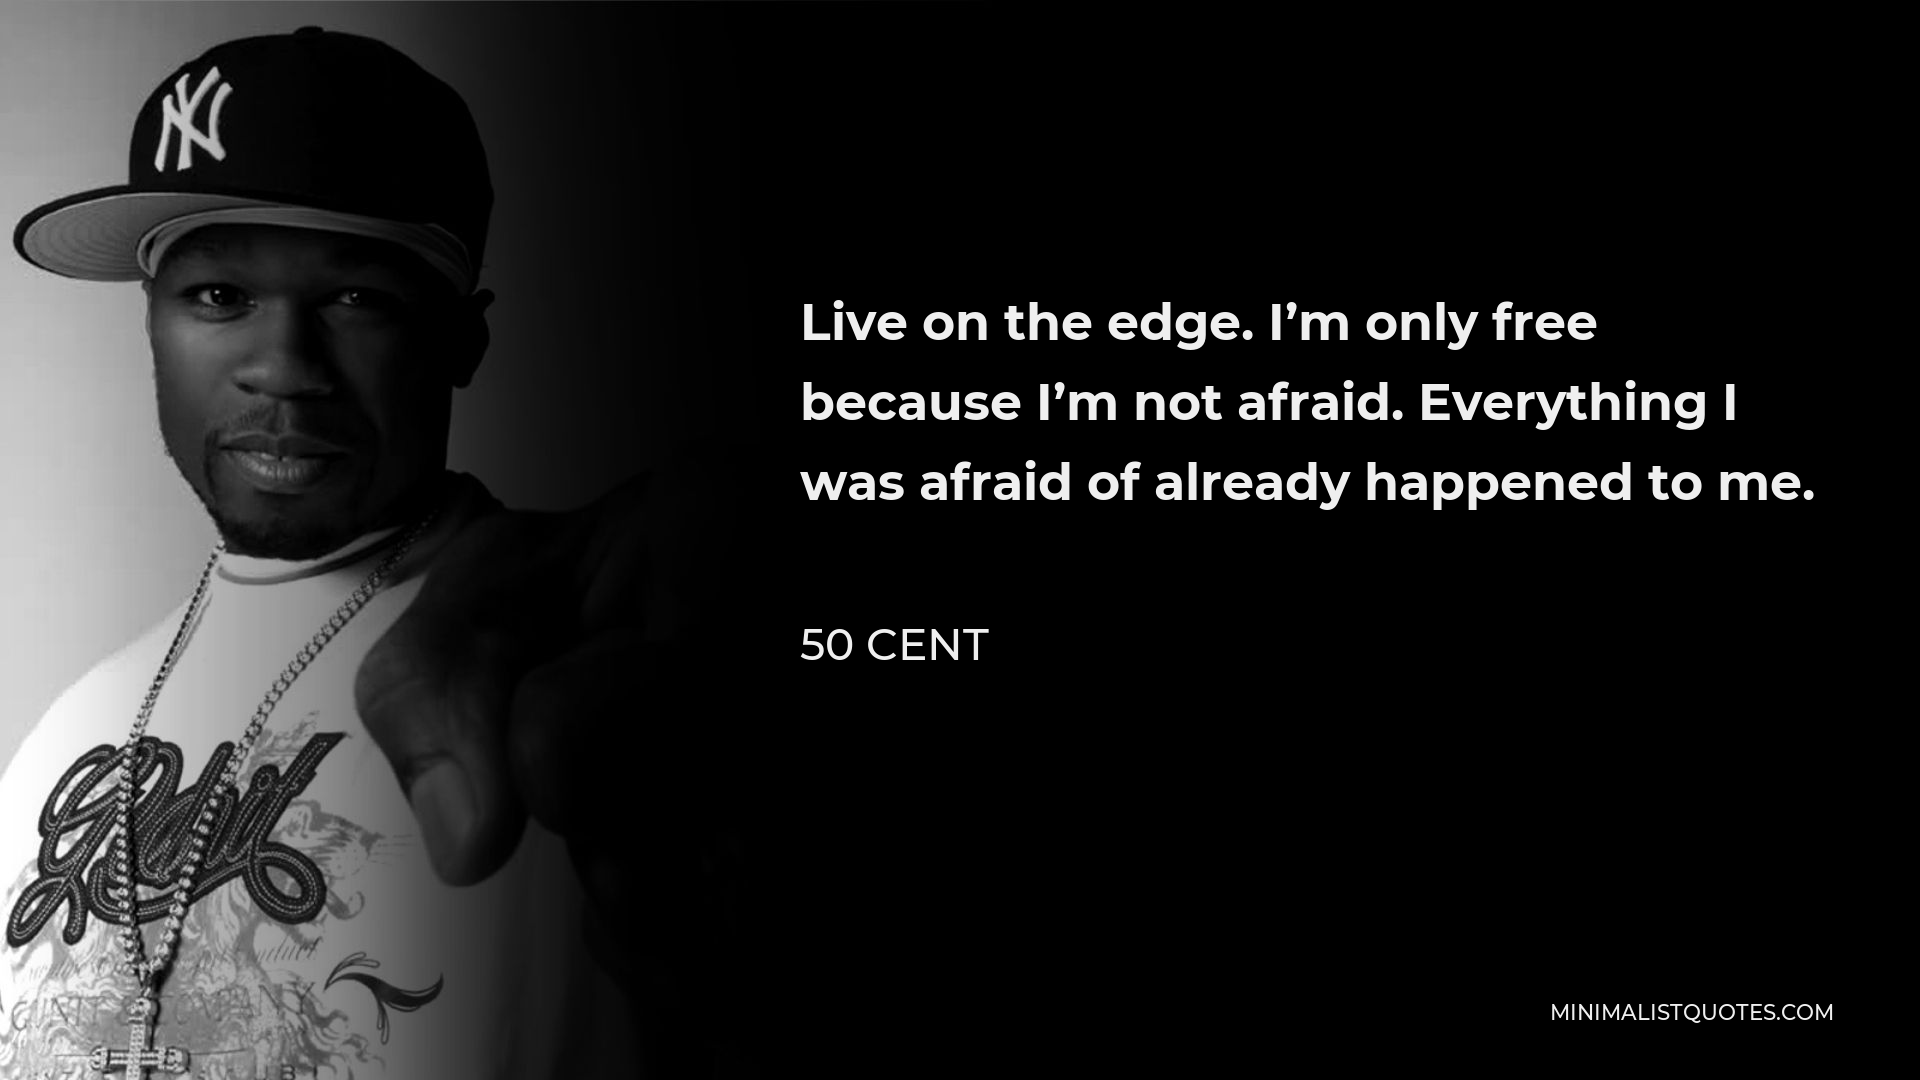 50 Cent Quote - Live on the edge. I’m only free because I’m not afraid. Everything I was afraid of already happened to me.